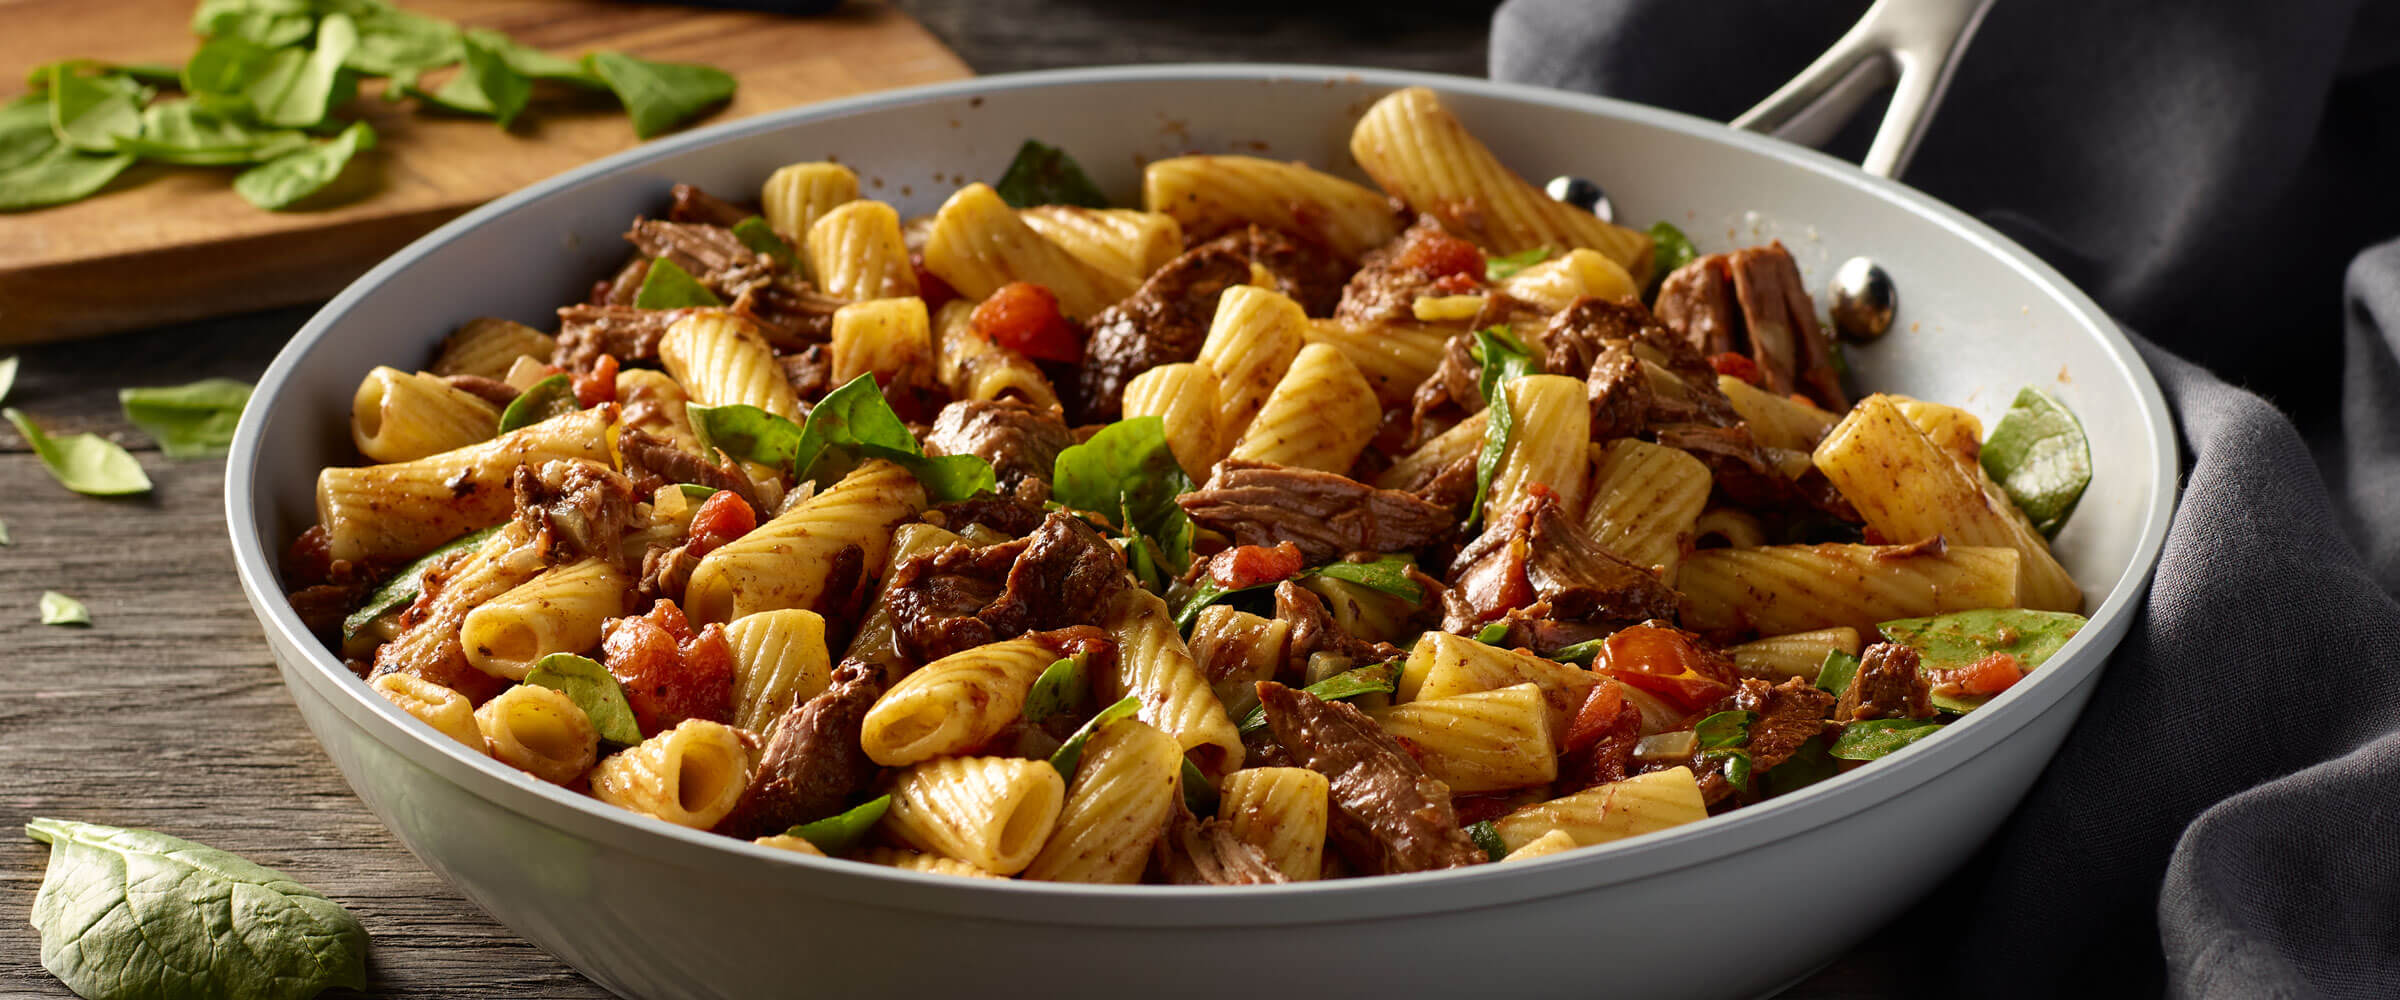 Beef Roast Pasta Skillet in gray pan topped with greens